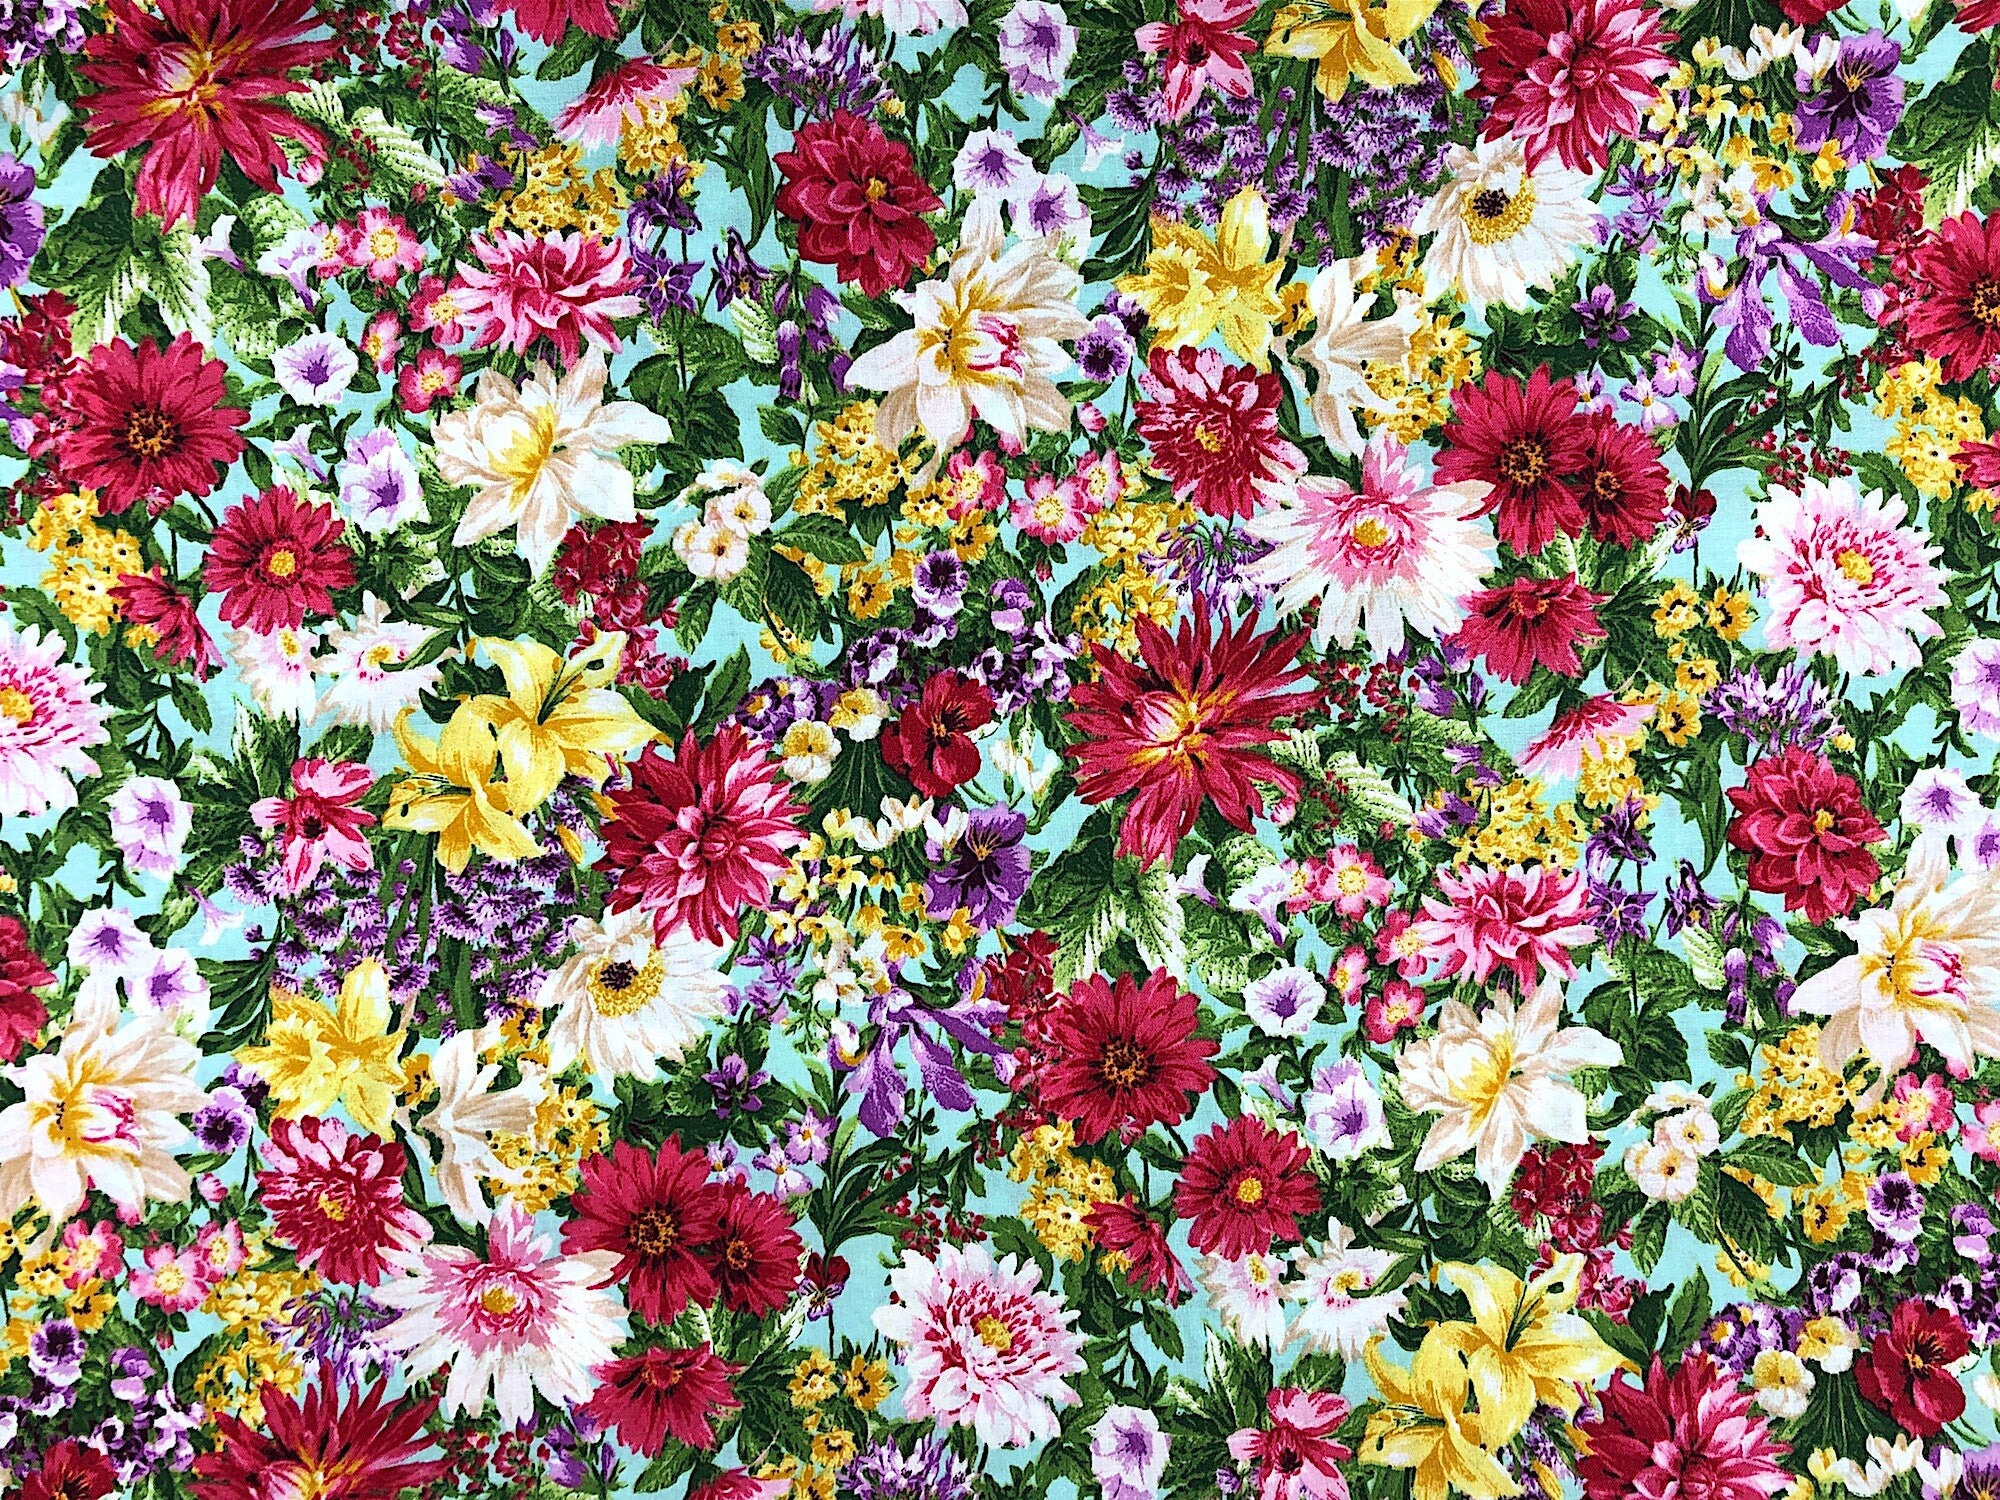 This fabric is called princess passion and is covered with dahlias, lilies and other flowers.